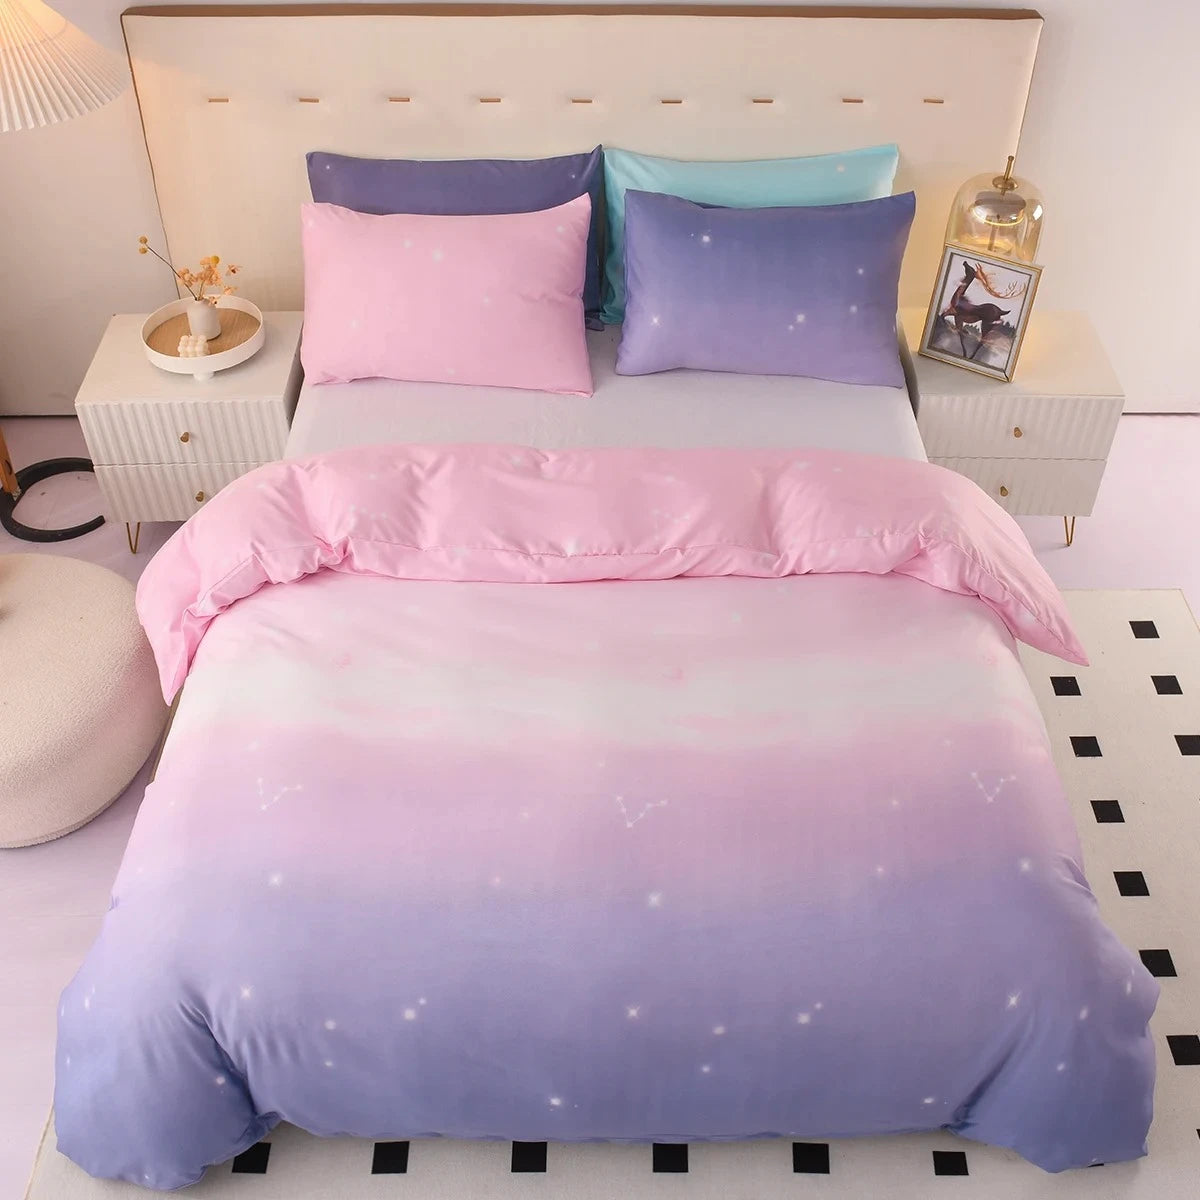 Bed fitted with a Pink and Purple Bedding set